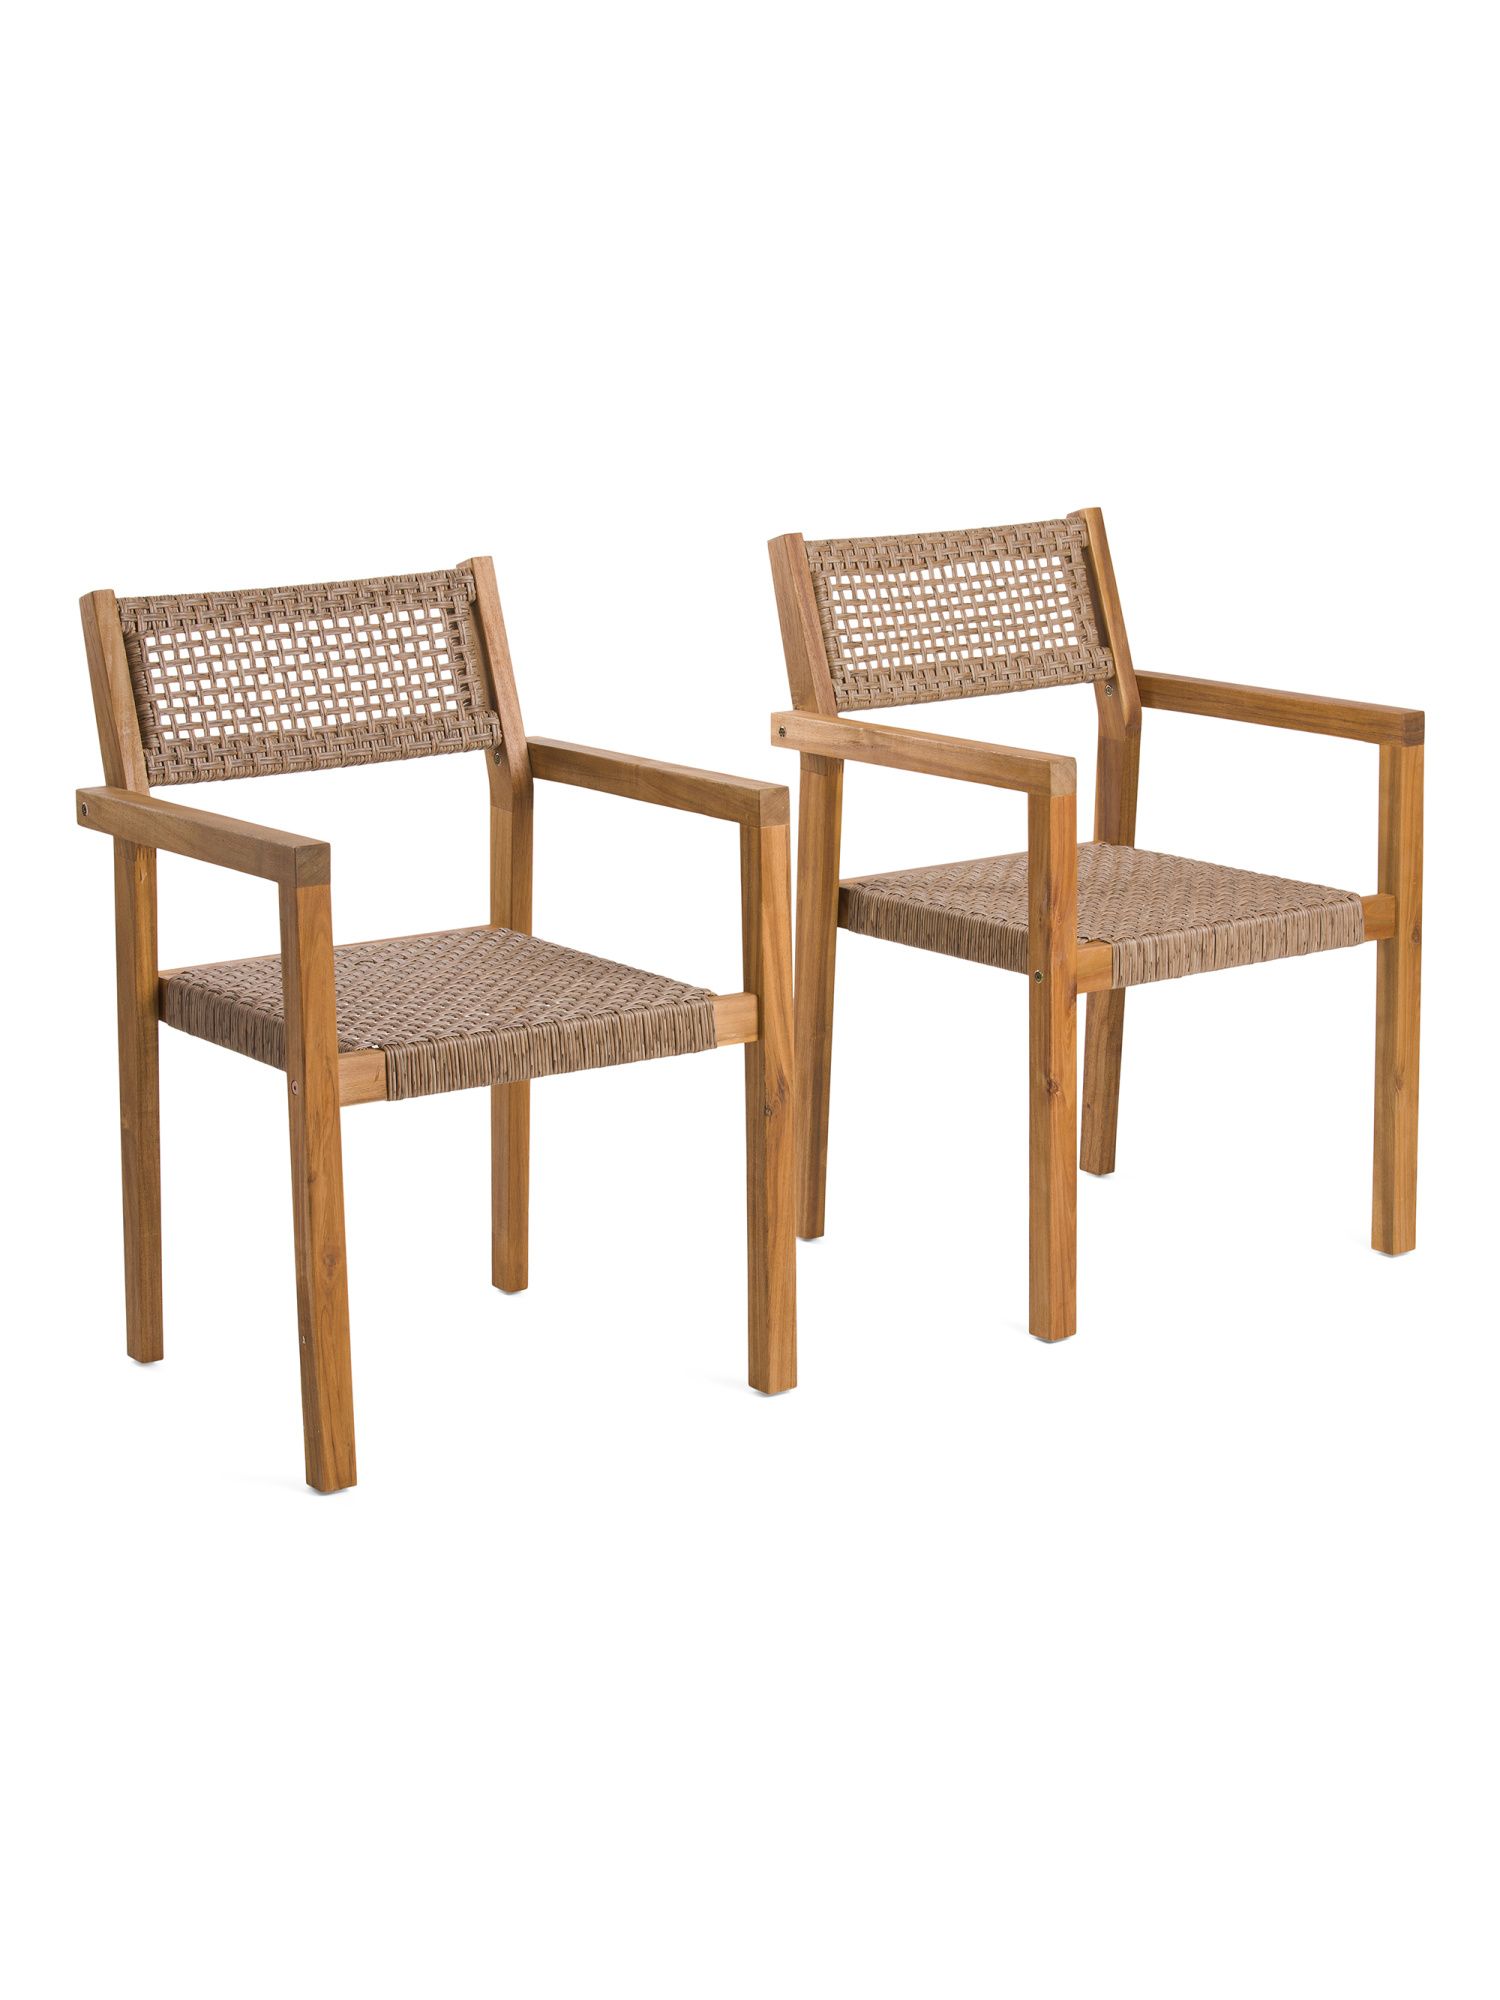 Set Of 2 Outdoor Dining Chairs | TJ Maxx